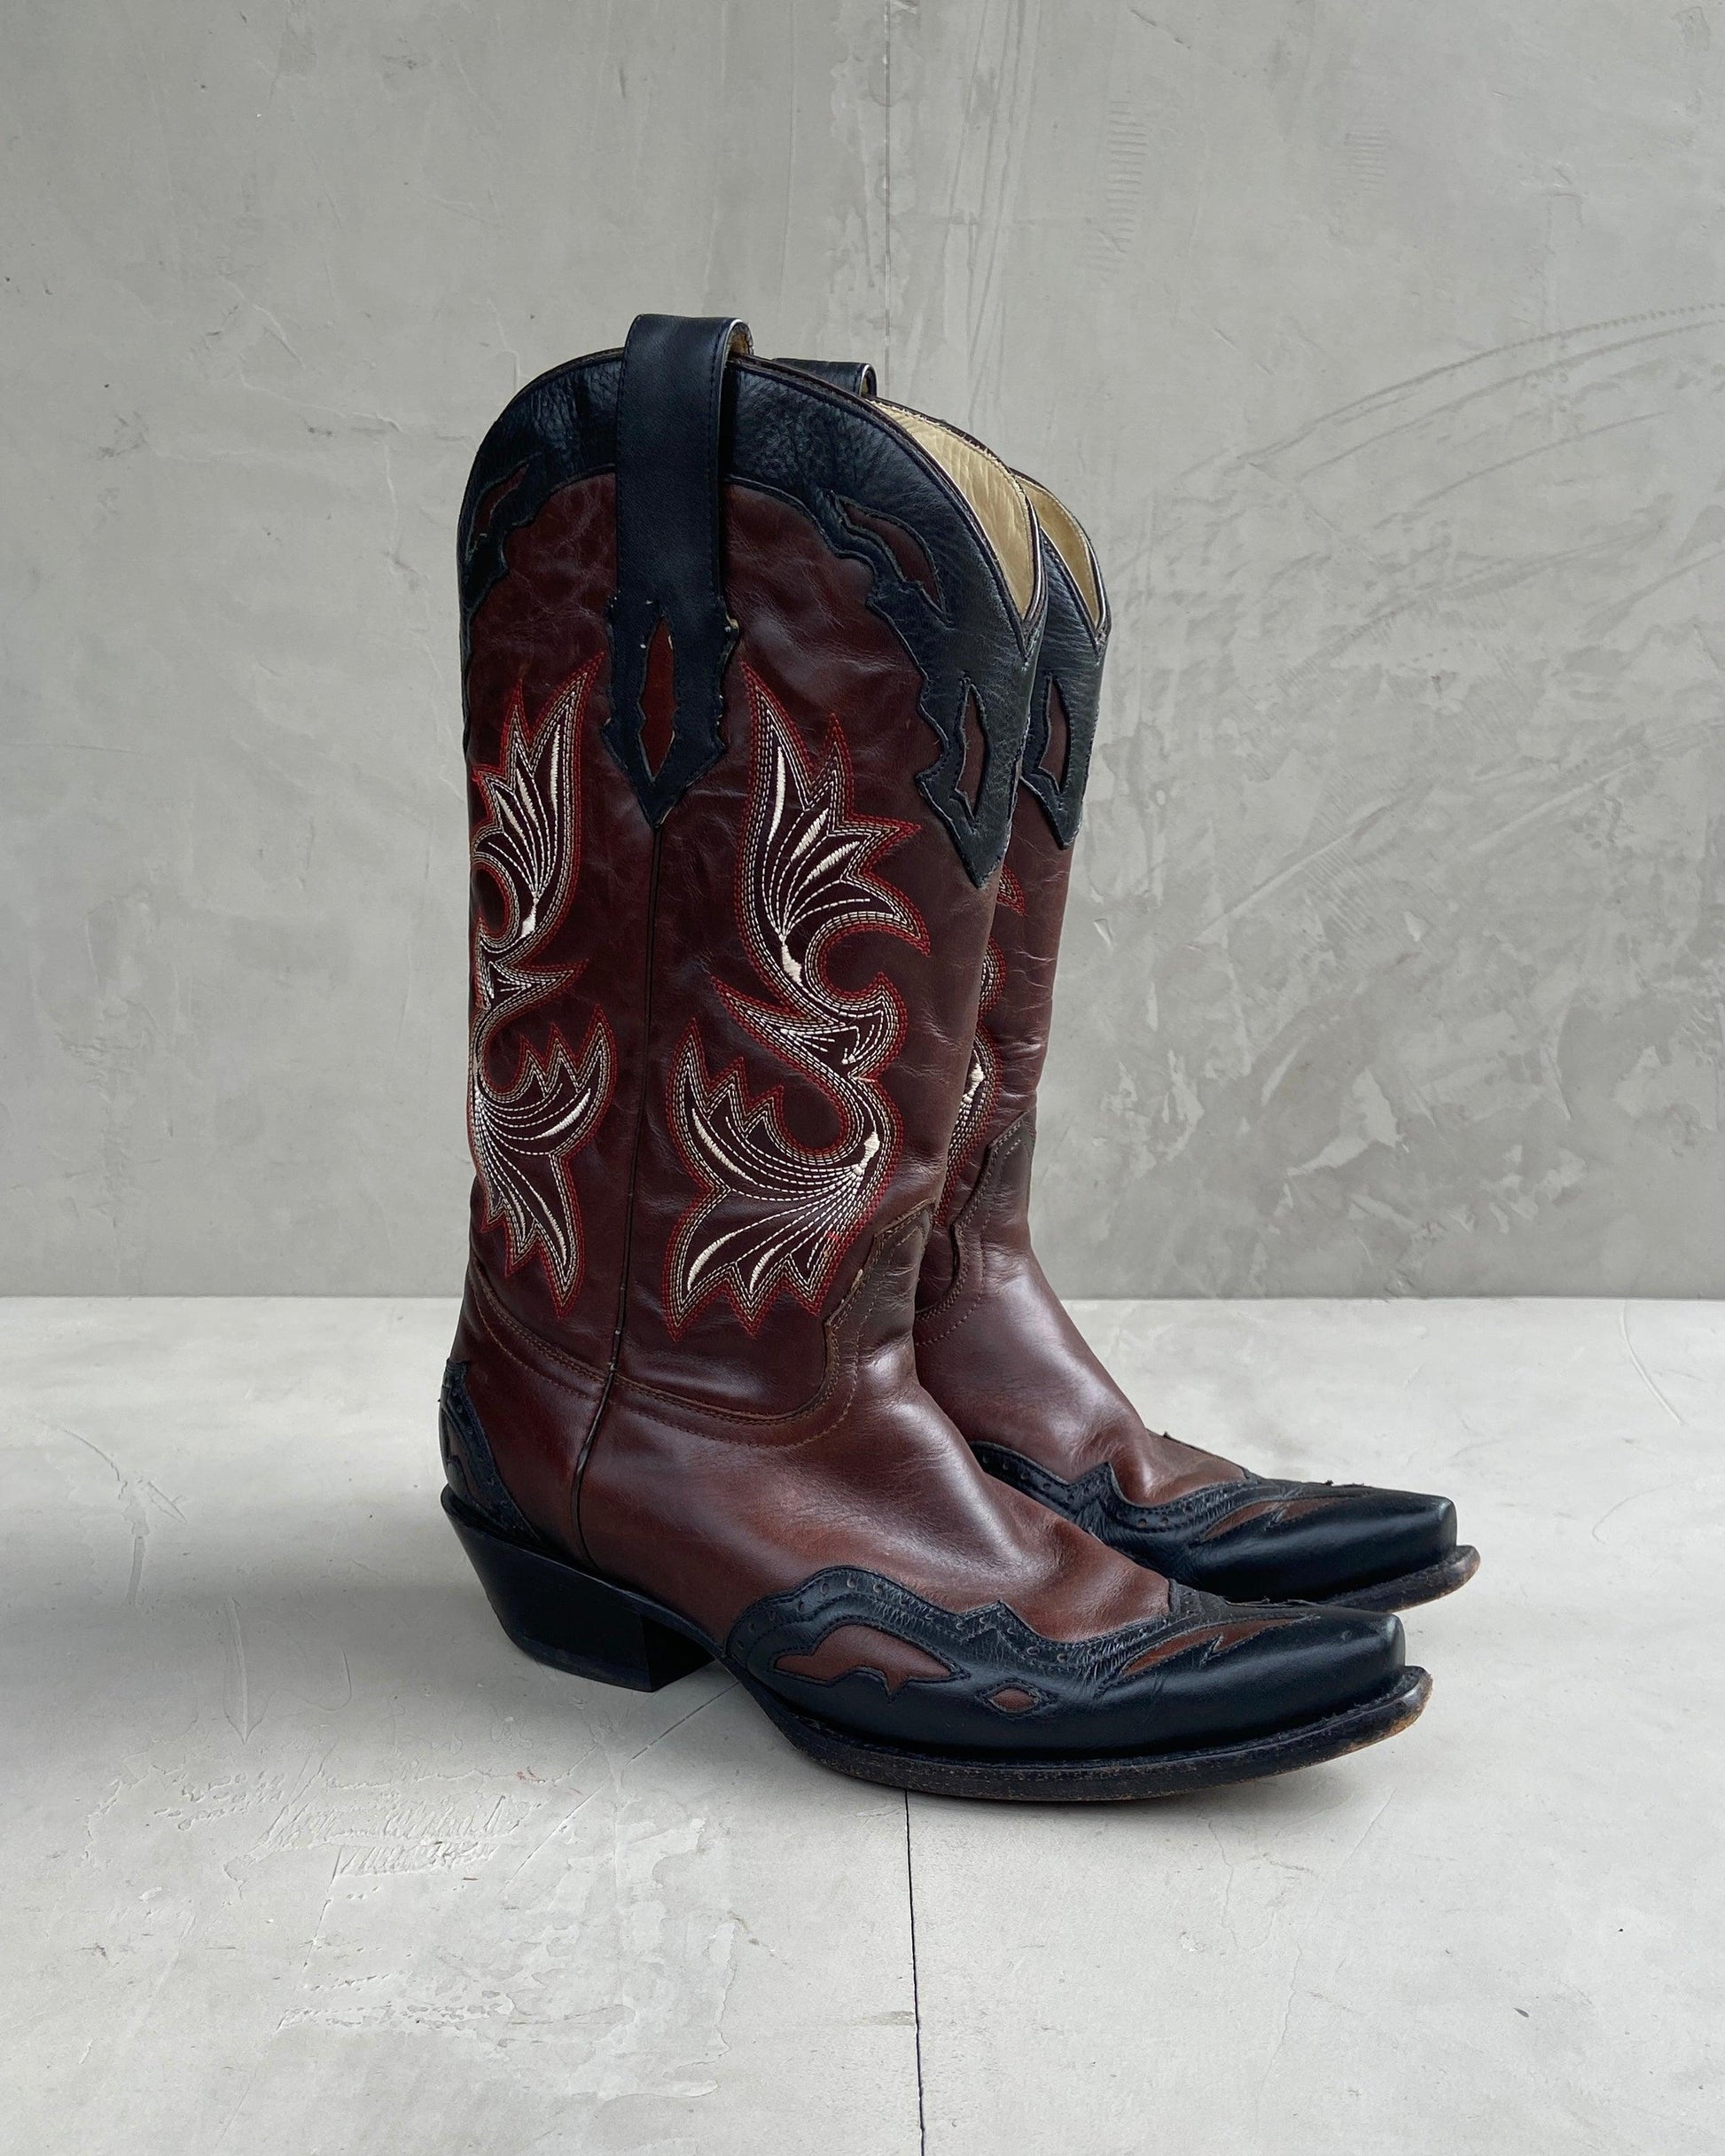 CORRAL LEATHER COWBOY BOOTS - UK 8 - Known Source